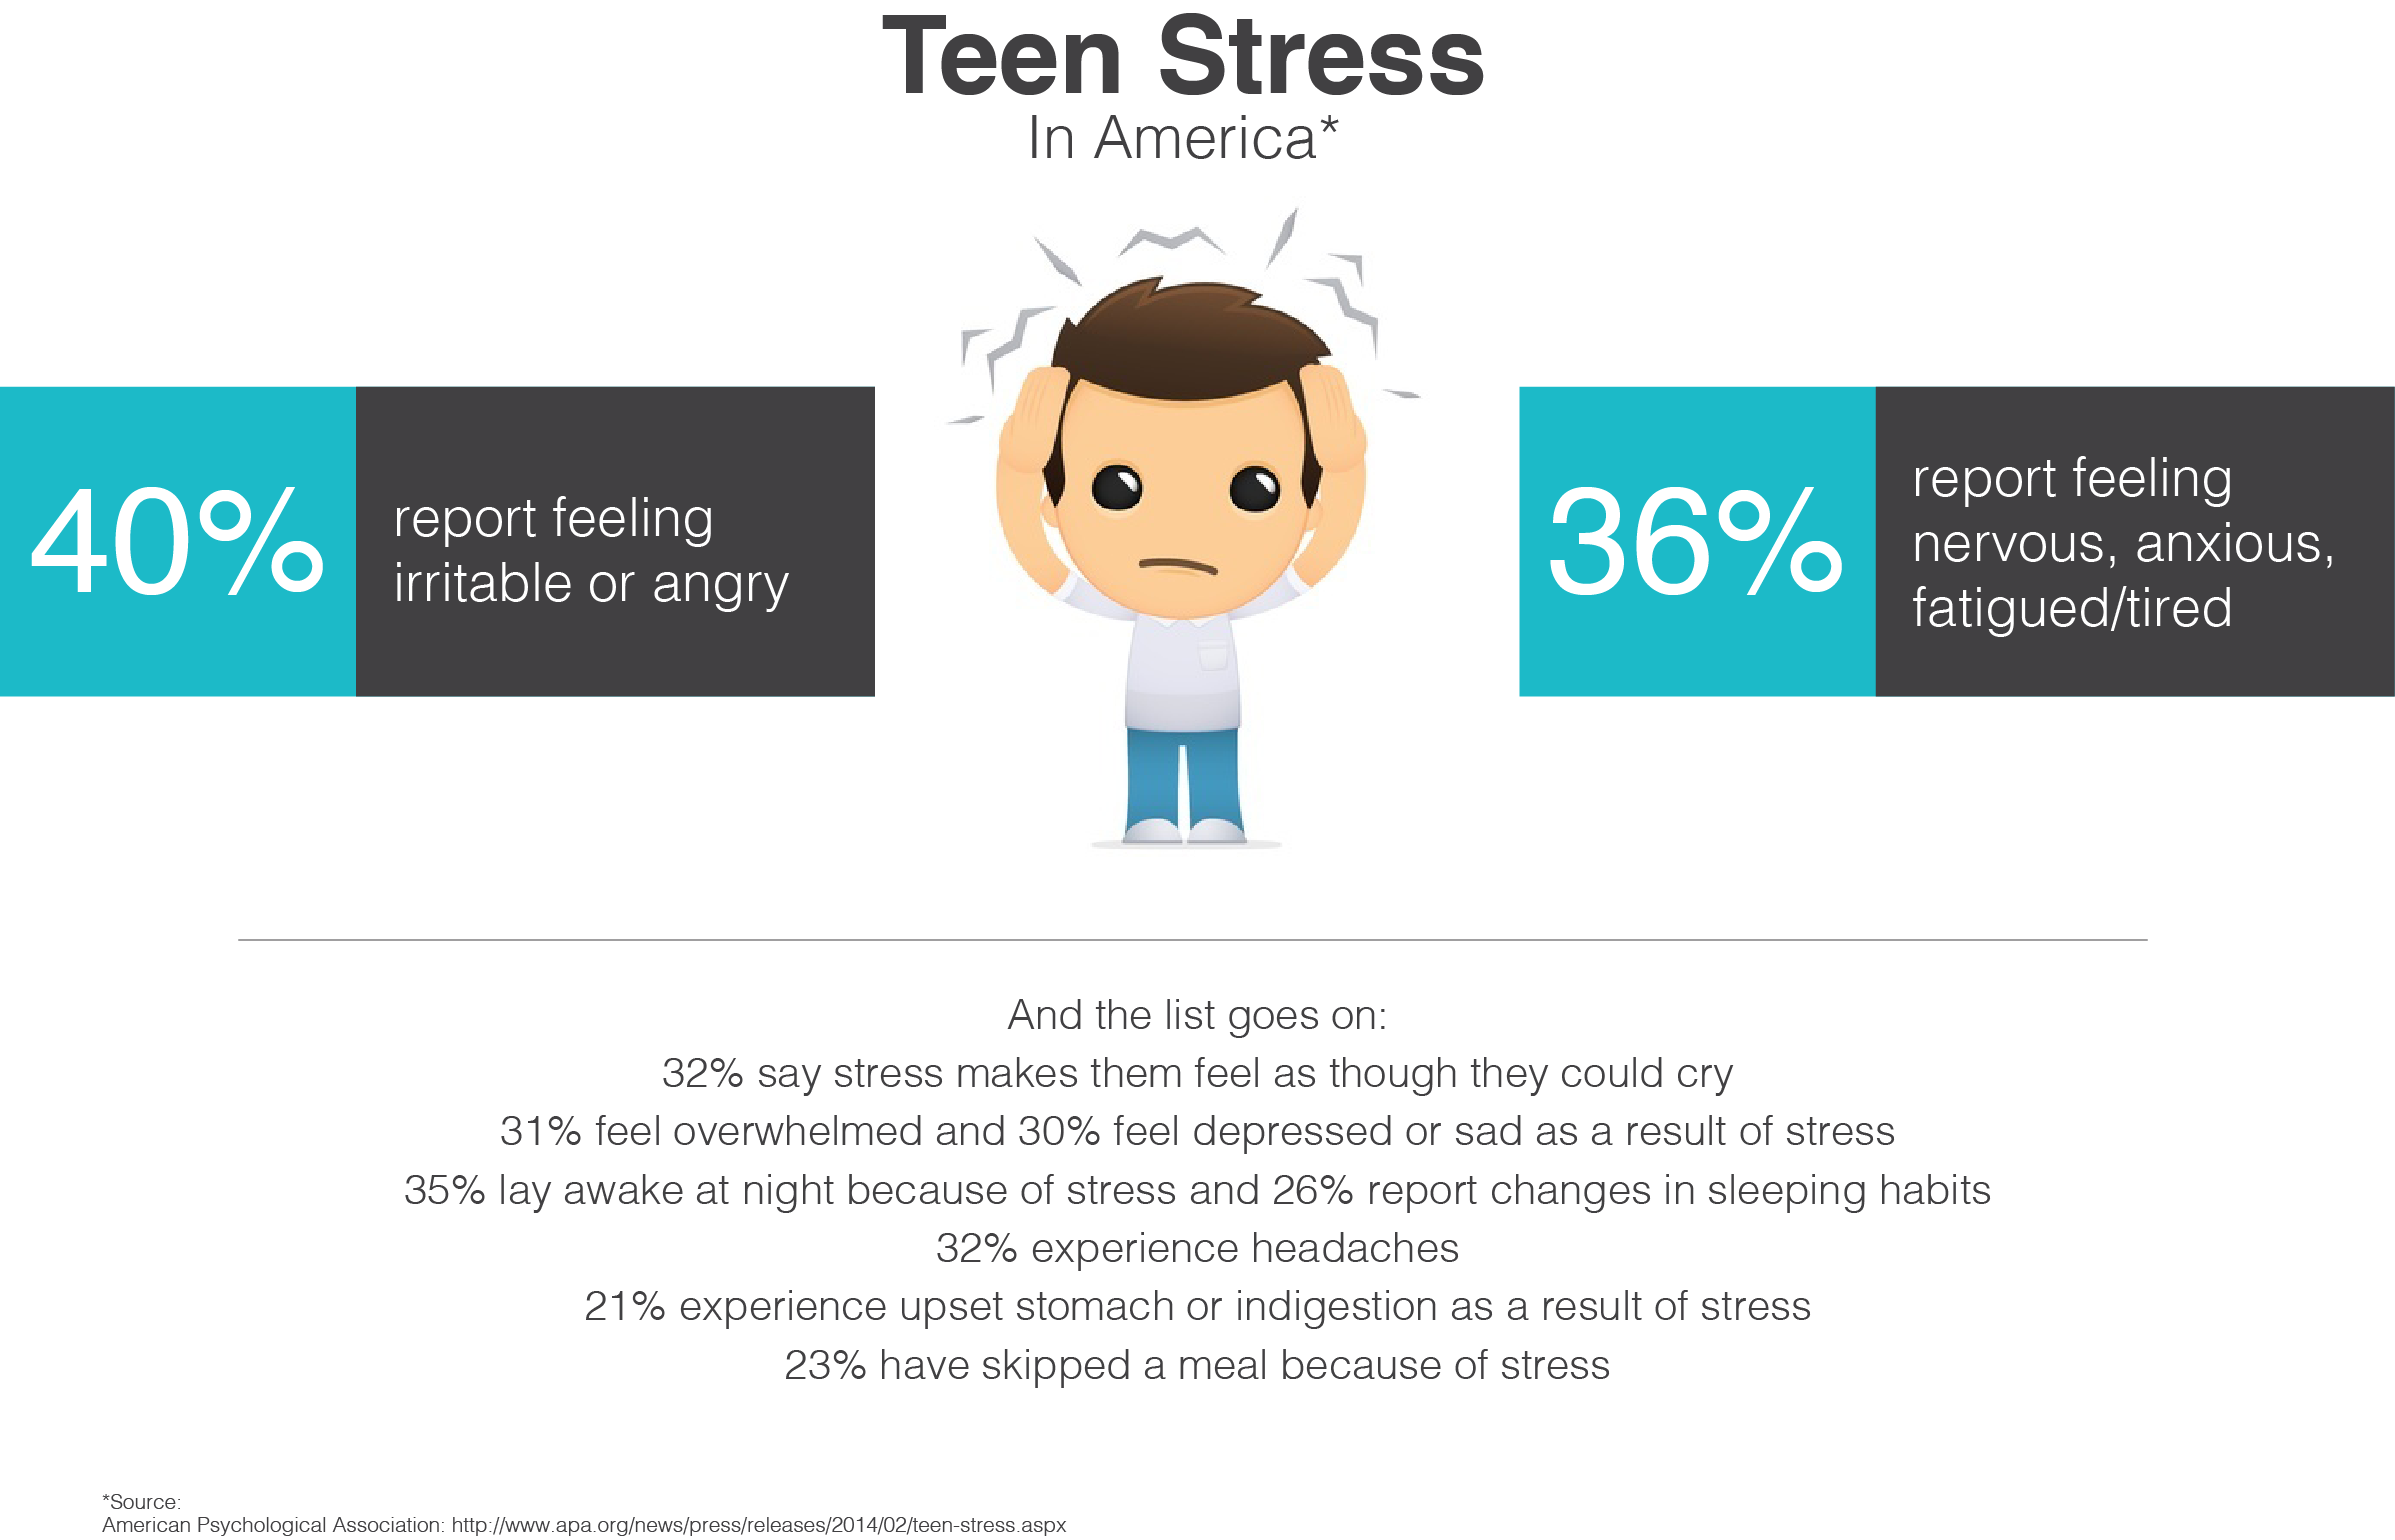 Teen Stress By The Numbers